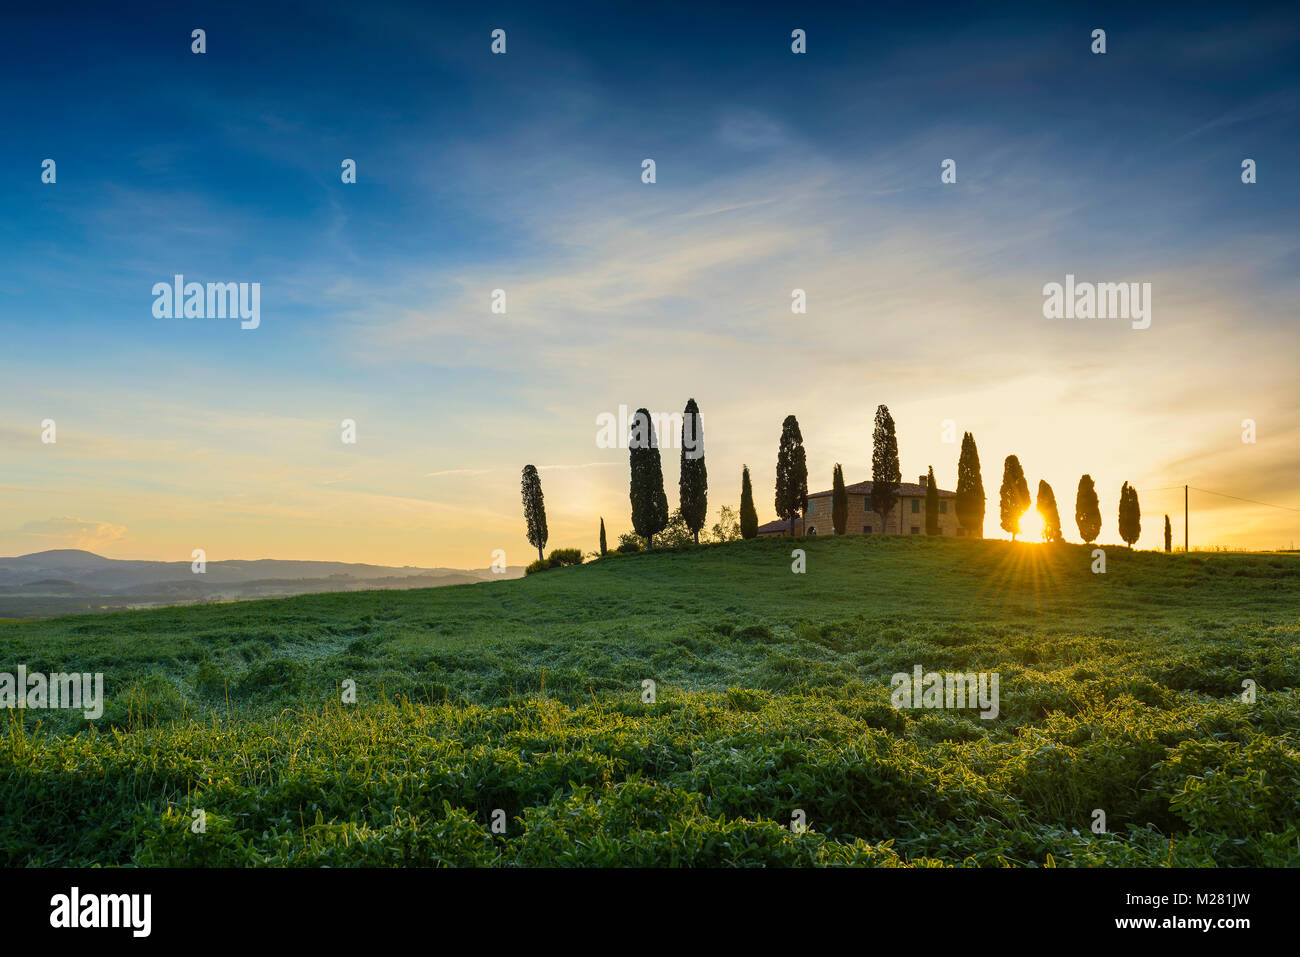 Tuscany landscape with cypresses and farmstead at sunrise, dawn, San Quirico d'Orcia, Val d'Orcia, Tuscany, Italy Stock Photo